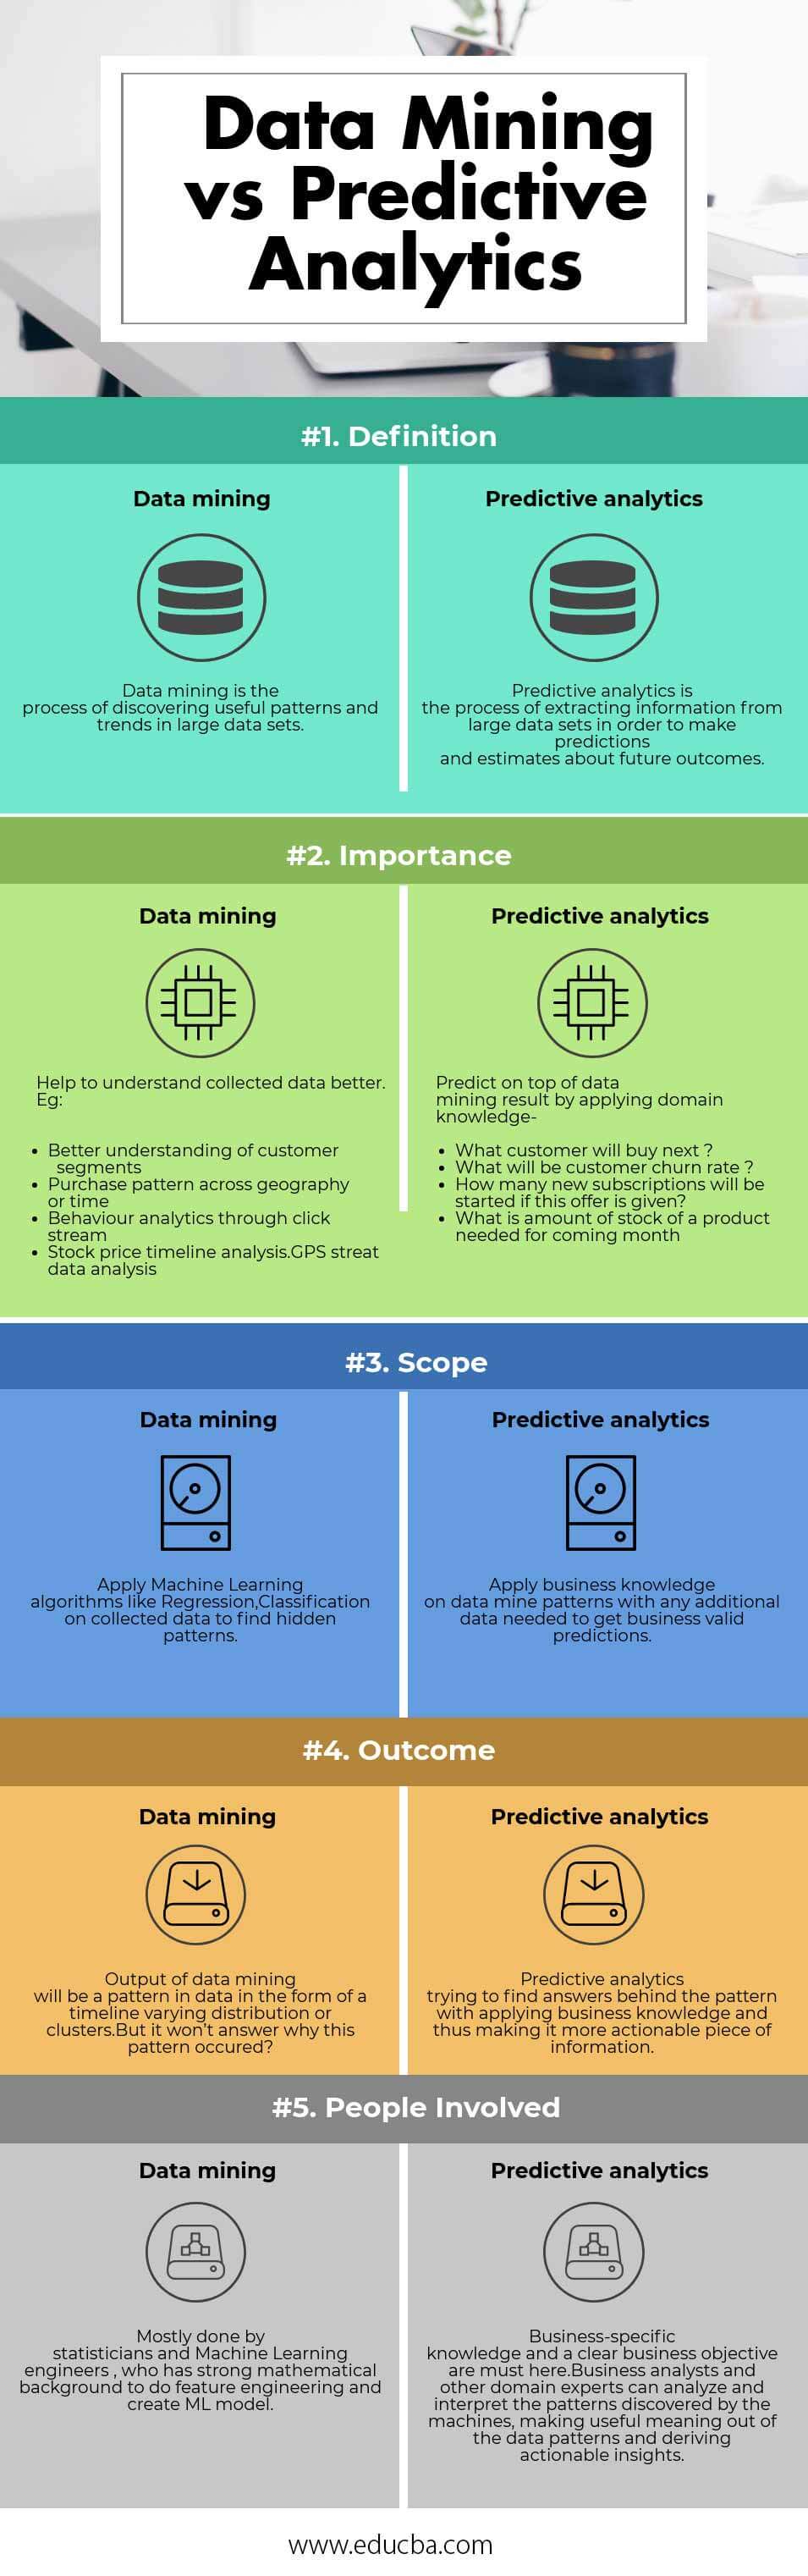 Predictive Analytics vs Data Mining | Which One Is More ...